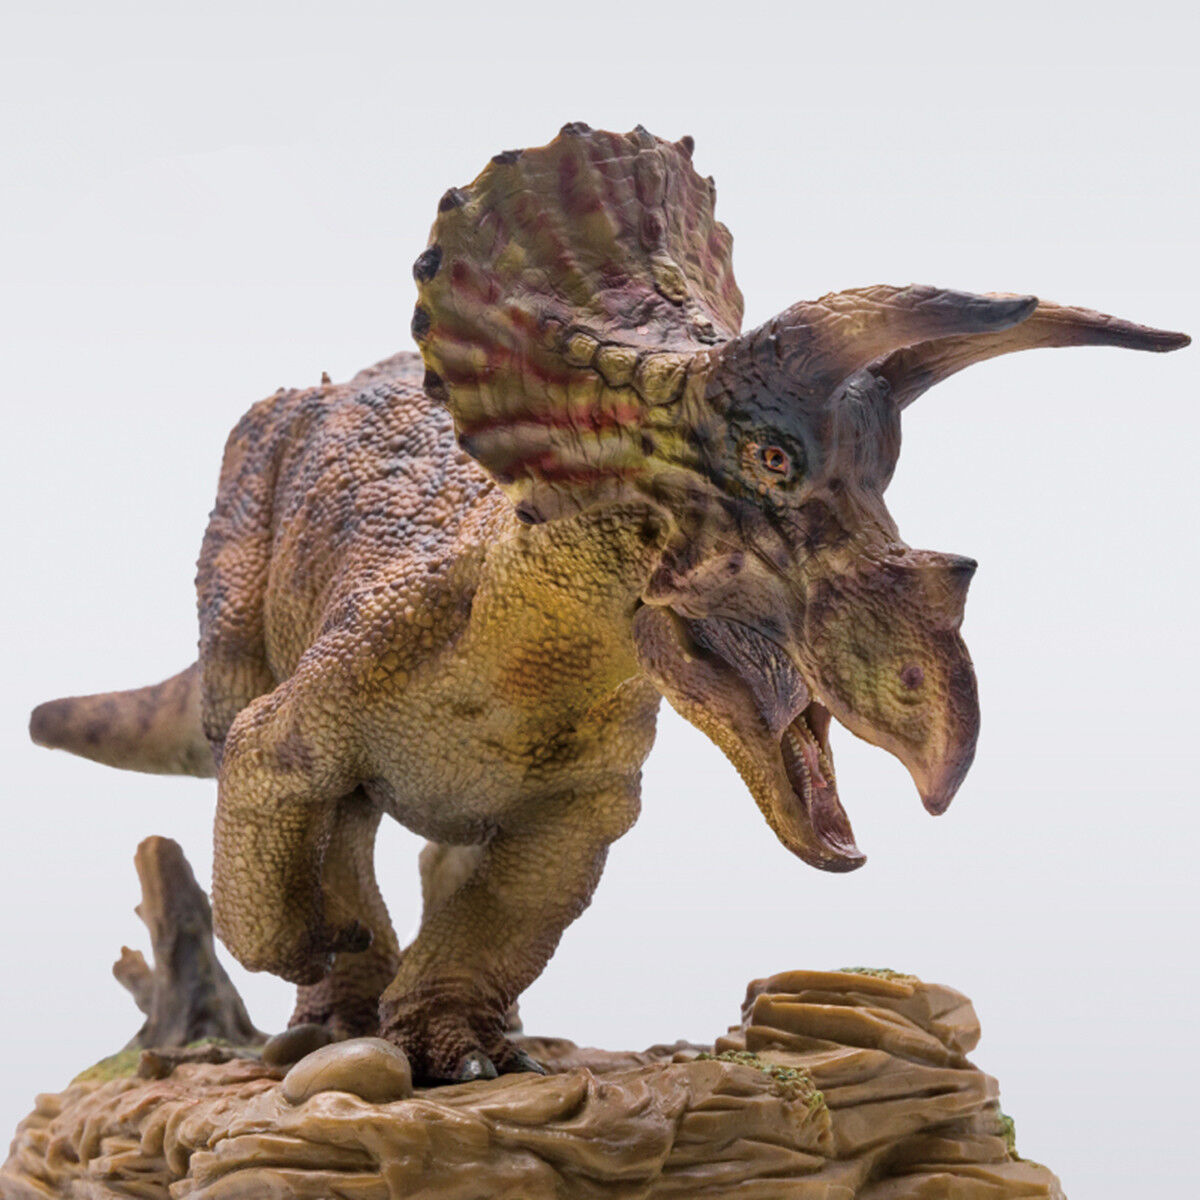 1/35 Triceratops Dinosaur Model Statue Figure + Base - Collector Toy Gift